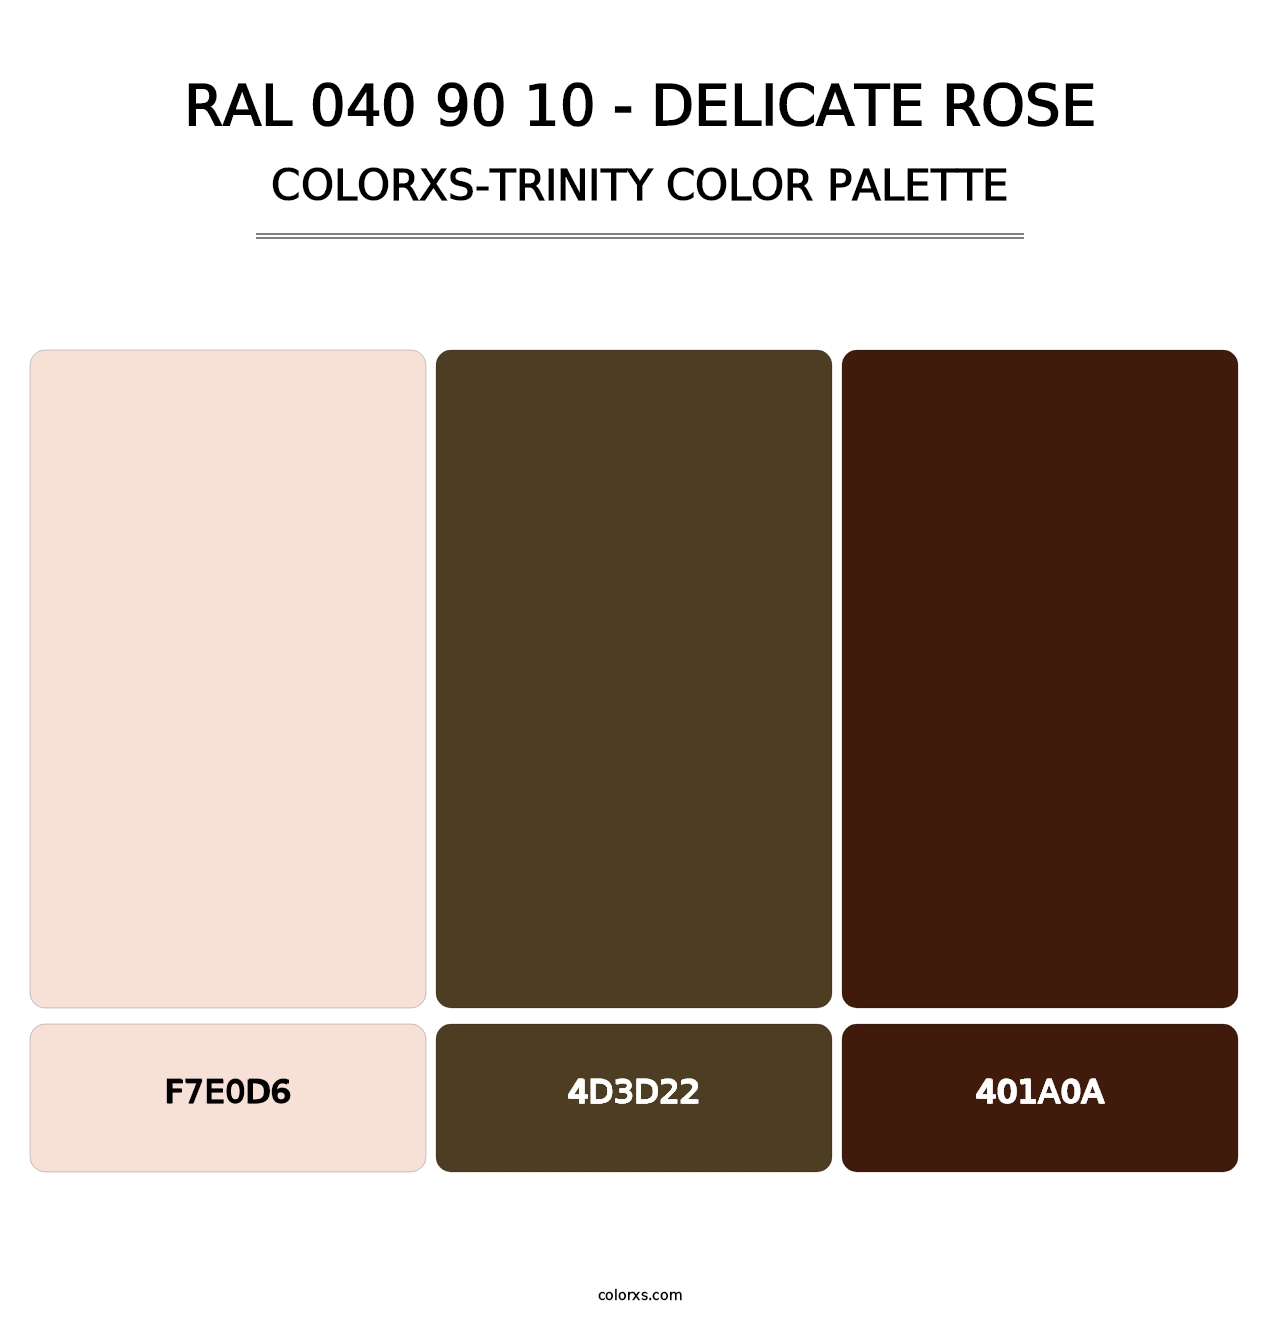 RAL 040 90 10 - Delicate Rose - Colorxs Trinity Palette